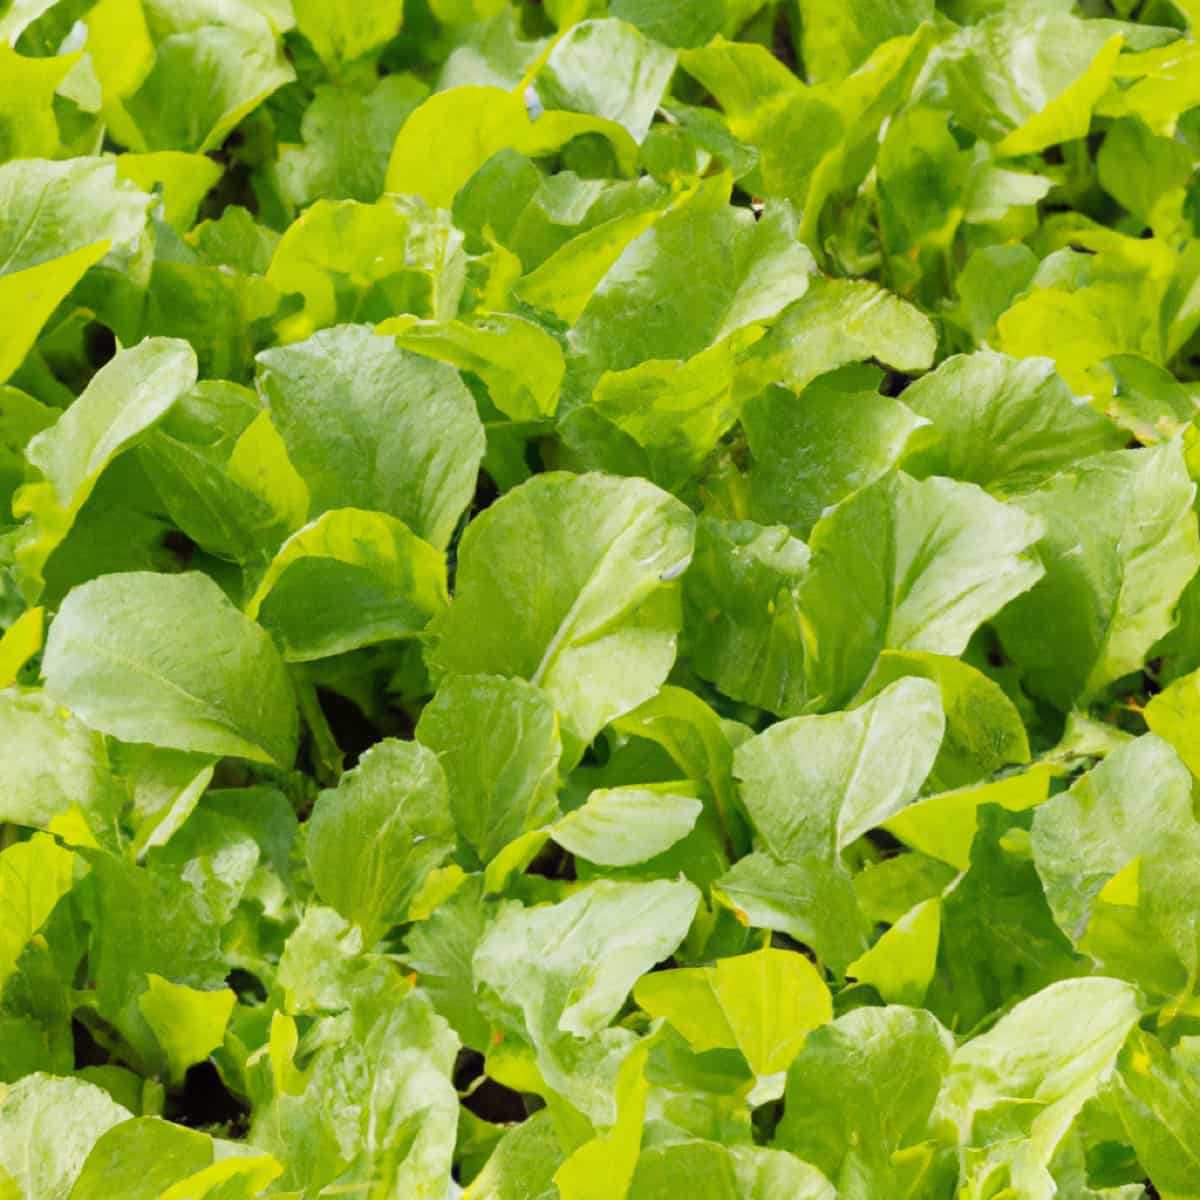 Common Problems With Mustard Greens1